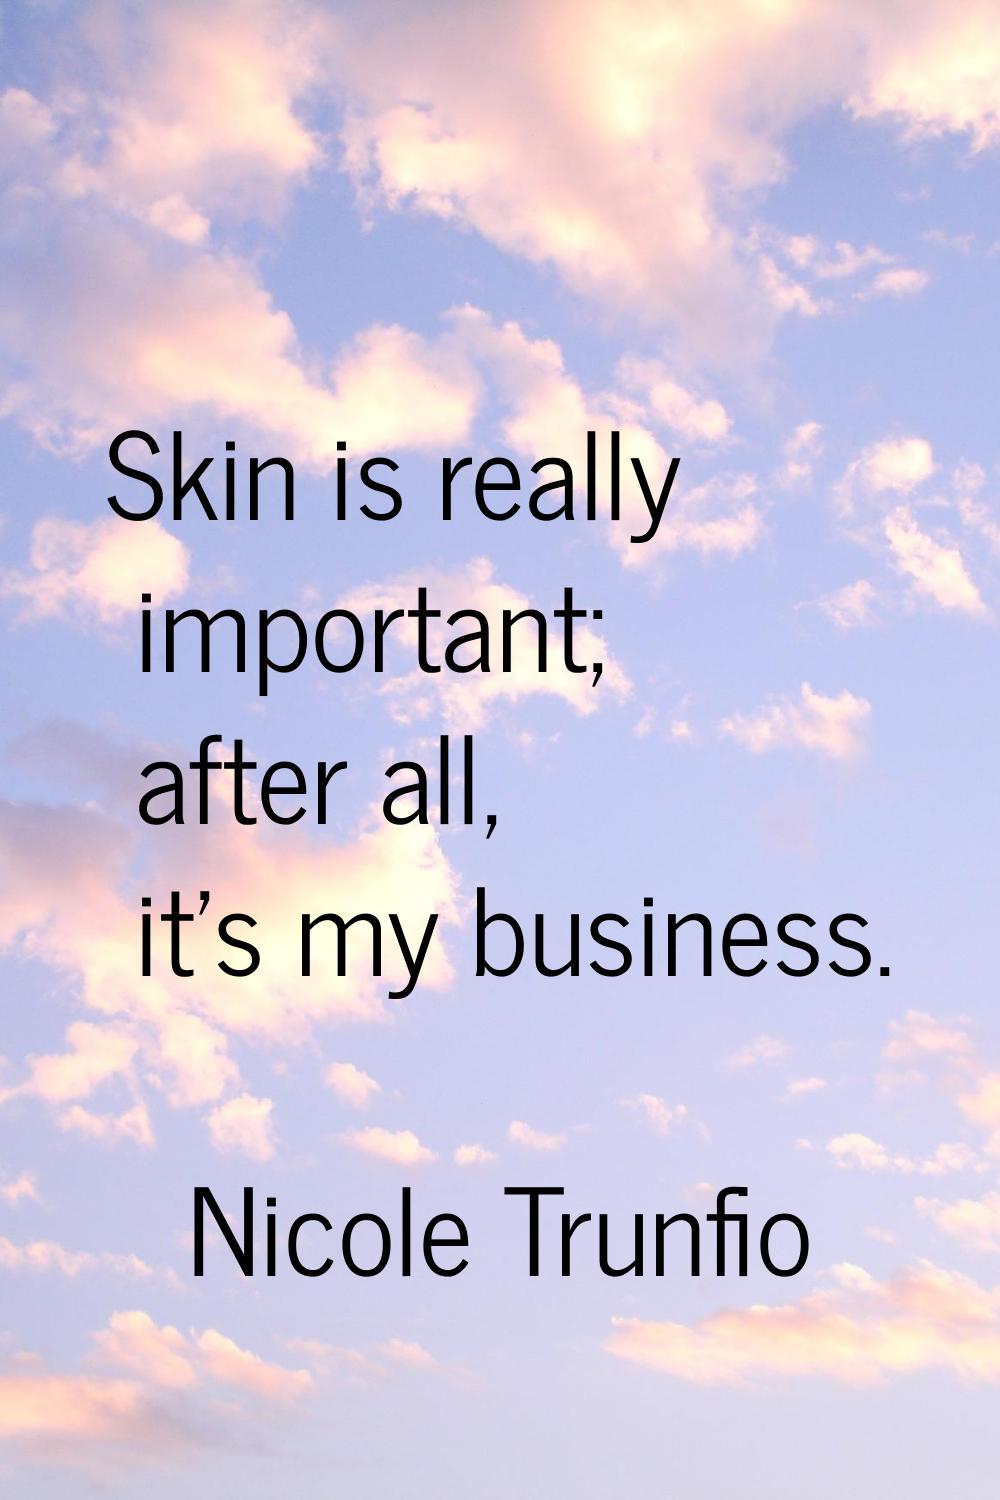 Skin is really important; after all, it's my business.